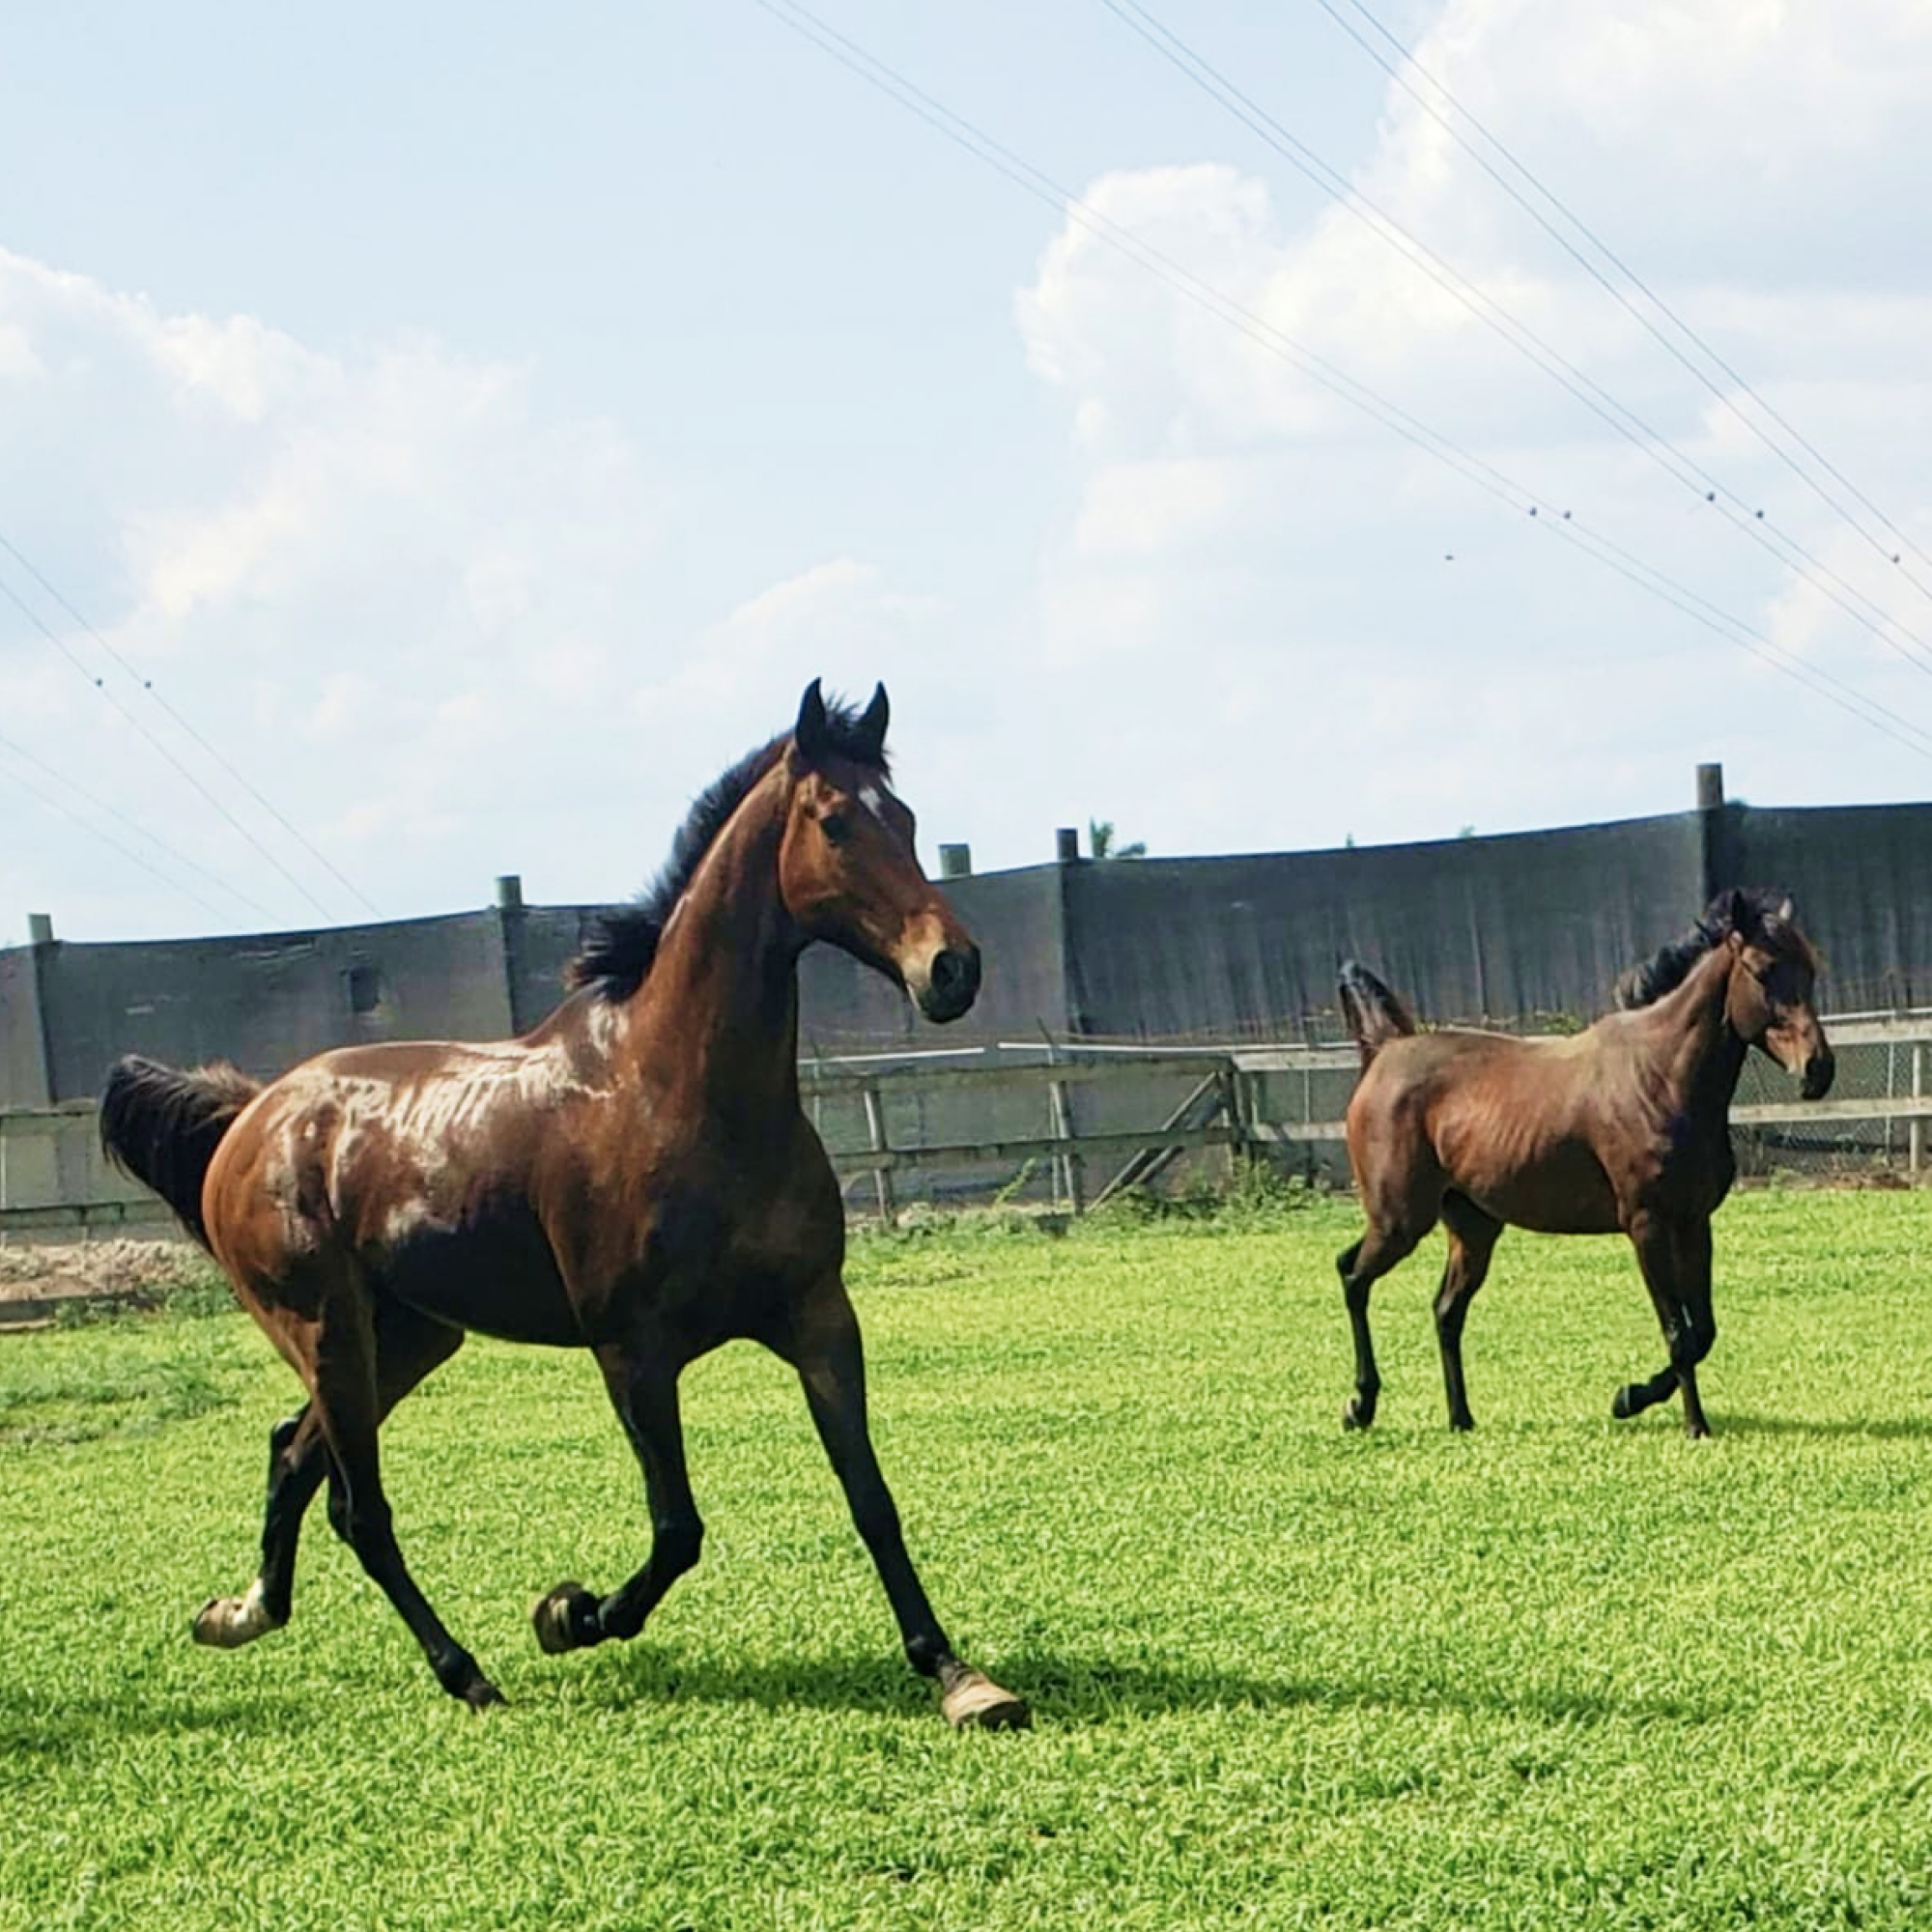 Horses galloping free at the South Florida Society for the Prevention of Cruelty to Animals